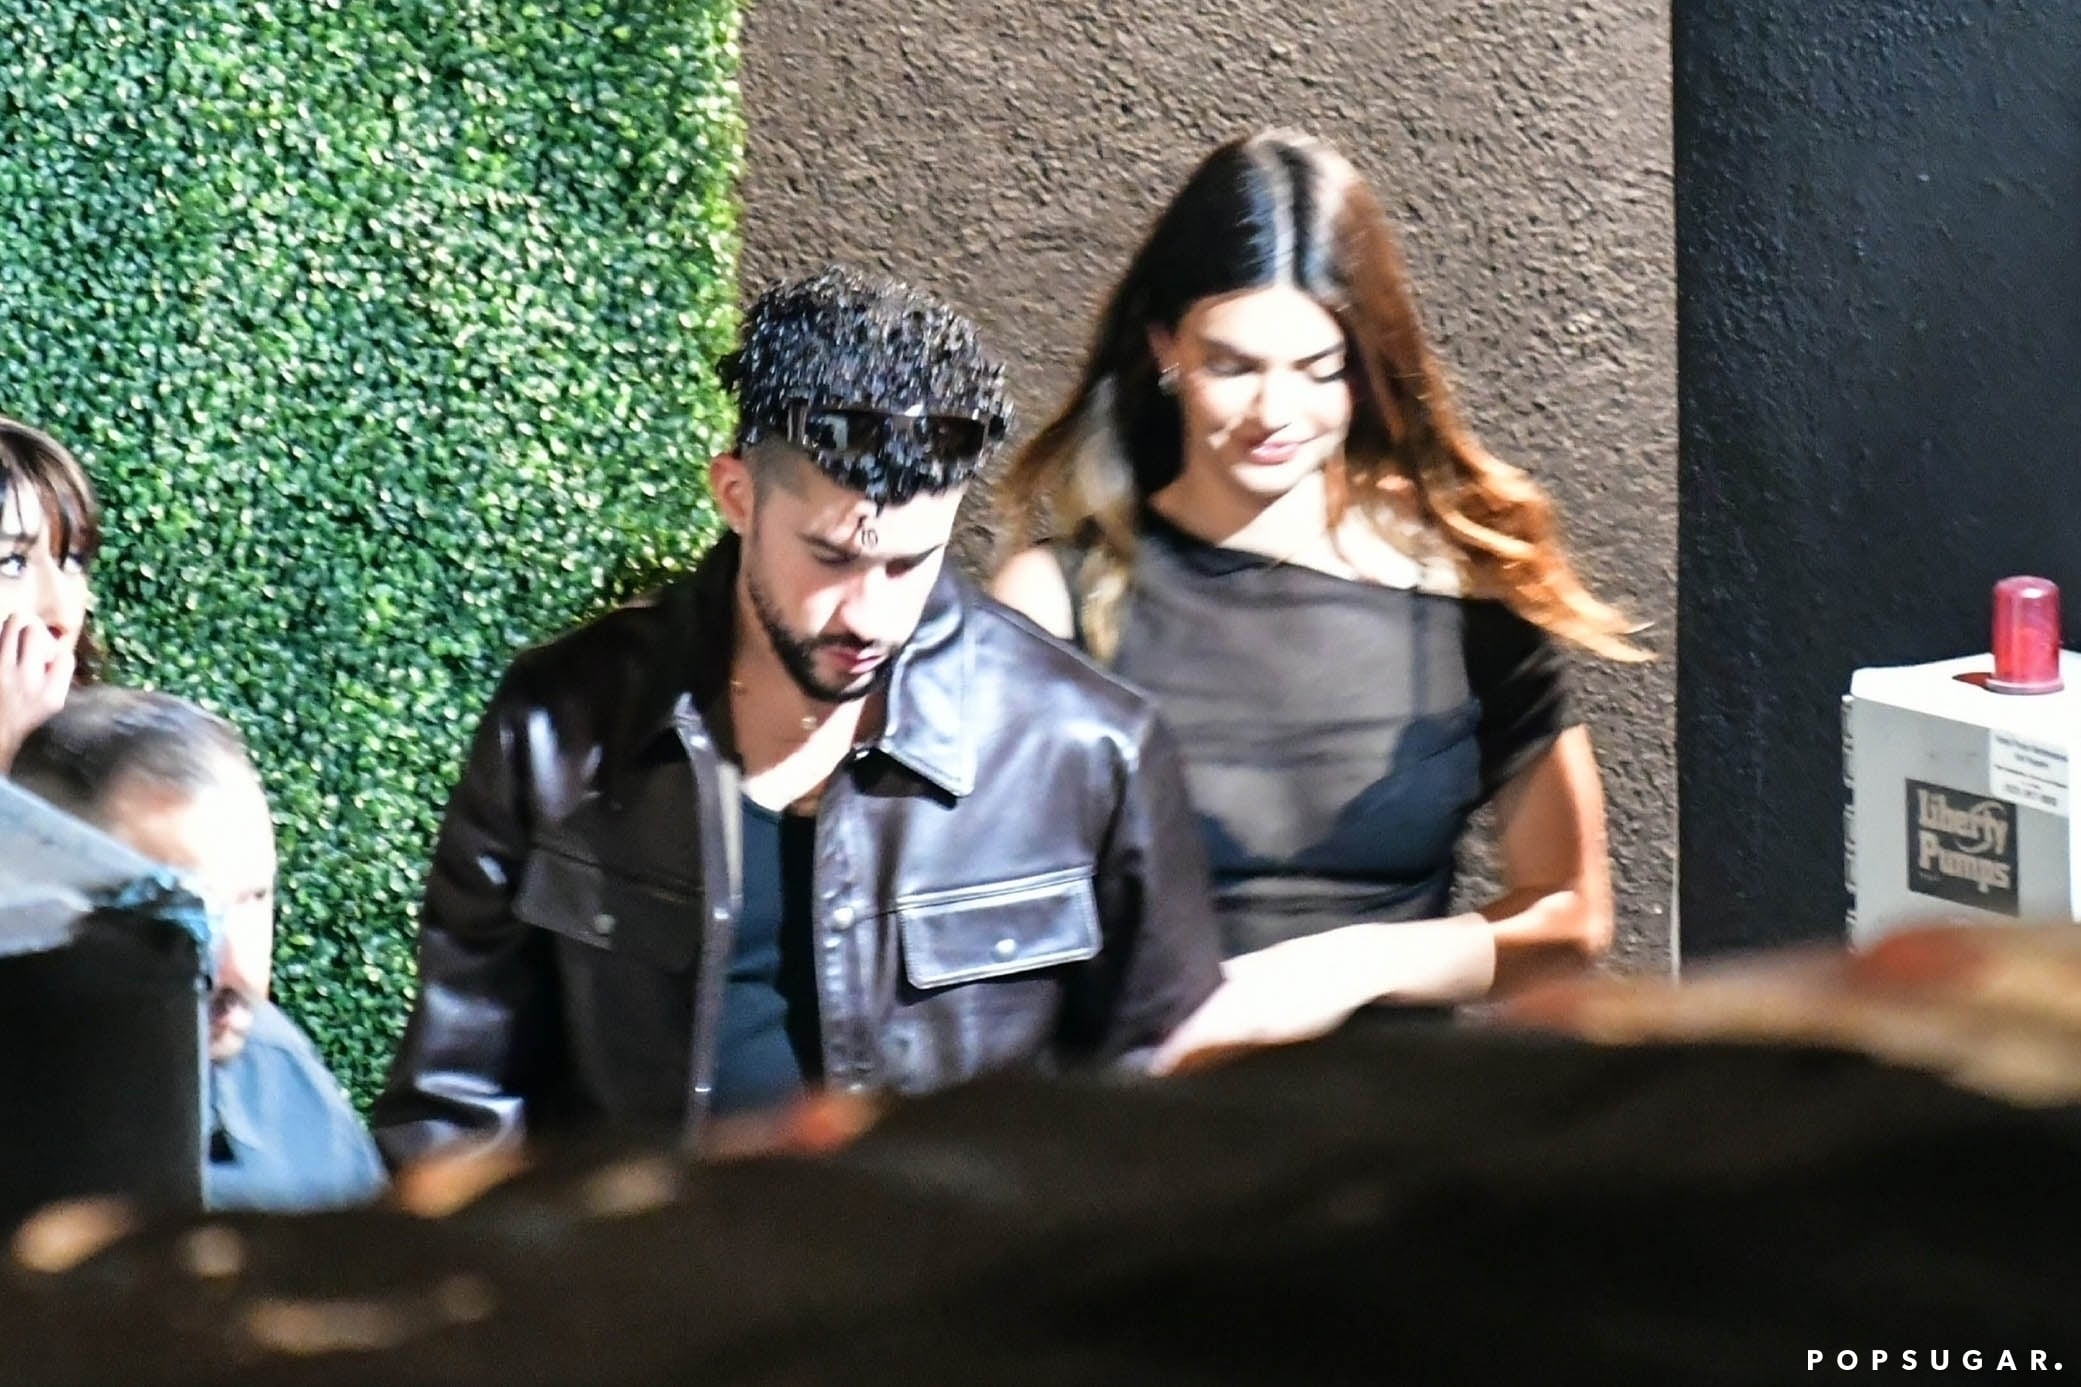 Kendall Jenner & Bad Bunny Twinned Again In All-Black Outfits For